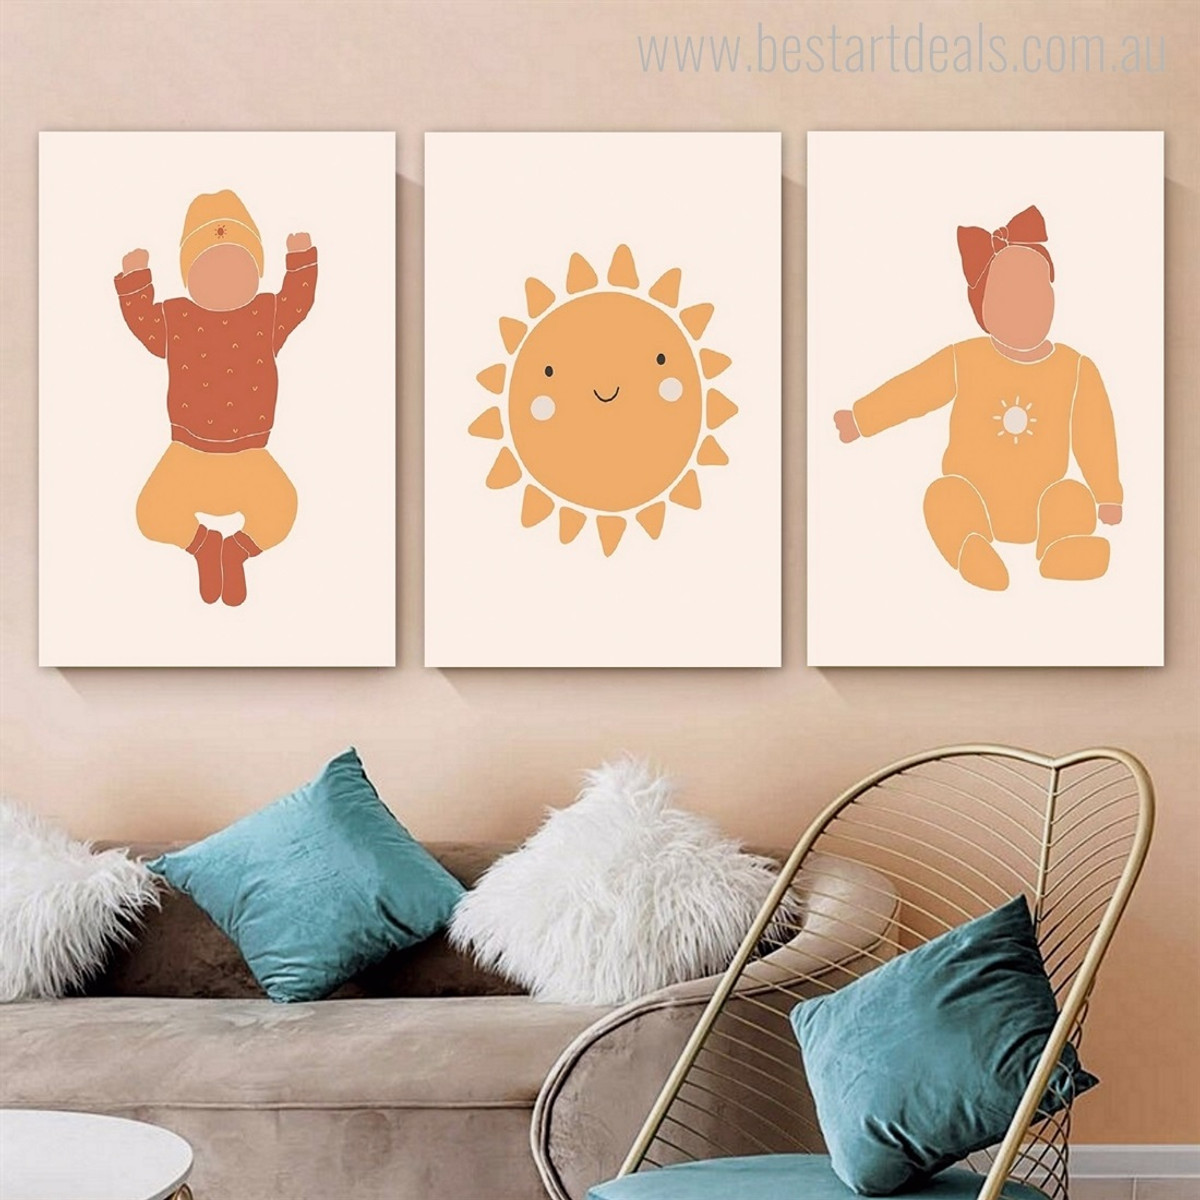 Cute Playing Baby Figure Cheap 3 Multi Panel Minimalist Wall Art Photograph Nursery Stretched Canvas Print for Room Assortment